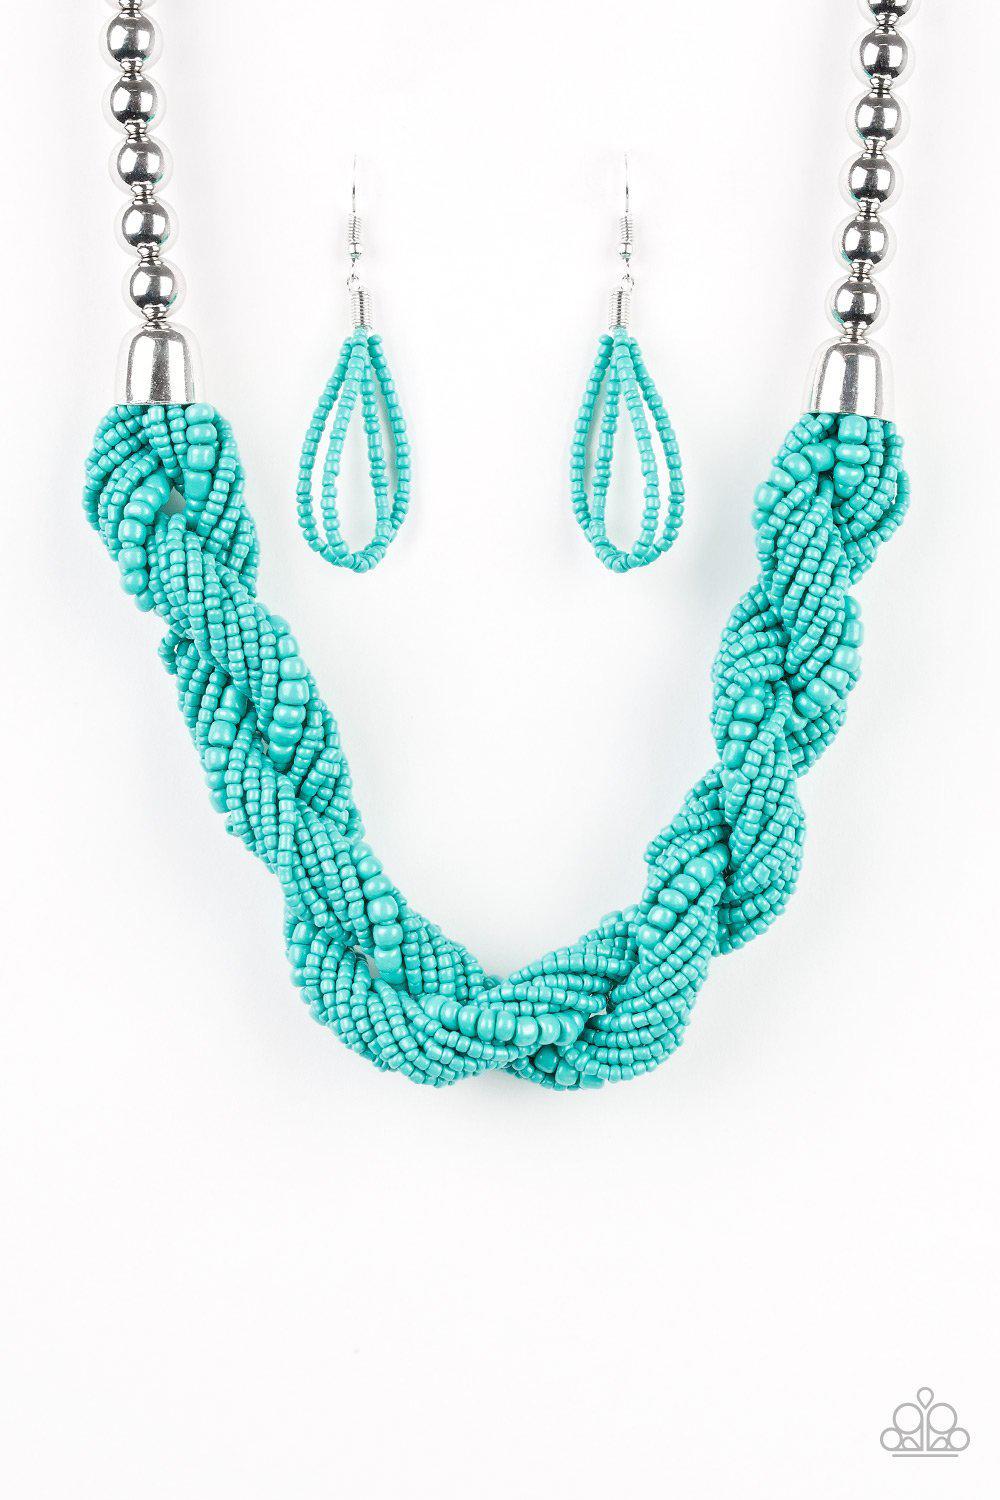 Savannah Surfin&#39; Turquoise Blue Seed Bead Necklace and matching Earrings - Paparazzi Accessories-CarasShop.com - $5 Jewelry by Cara Jewels